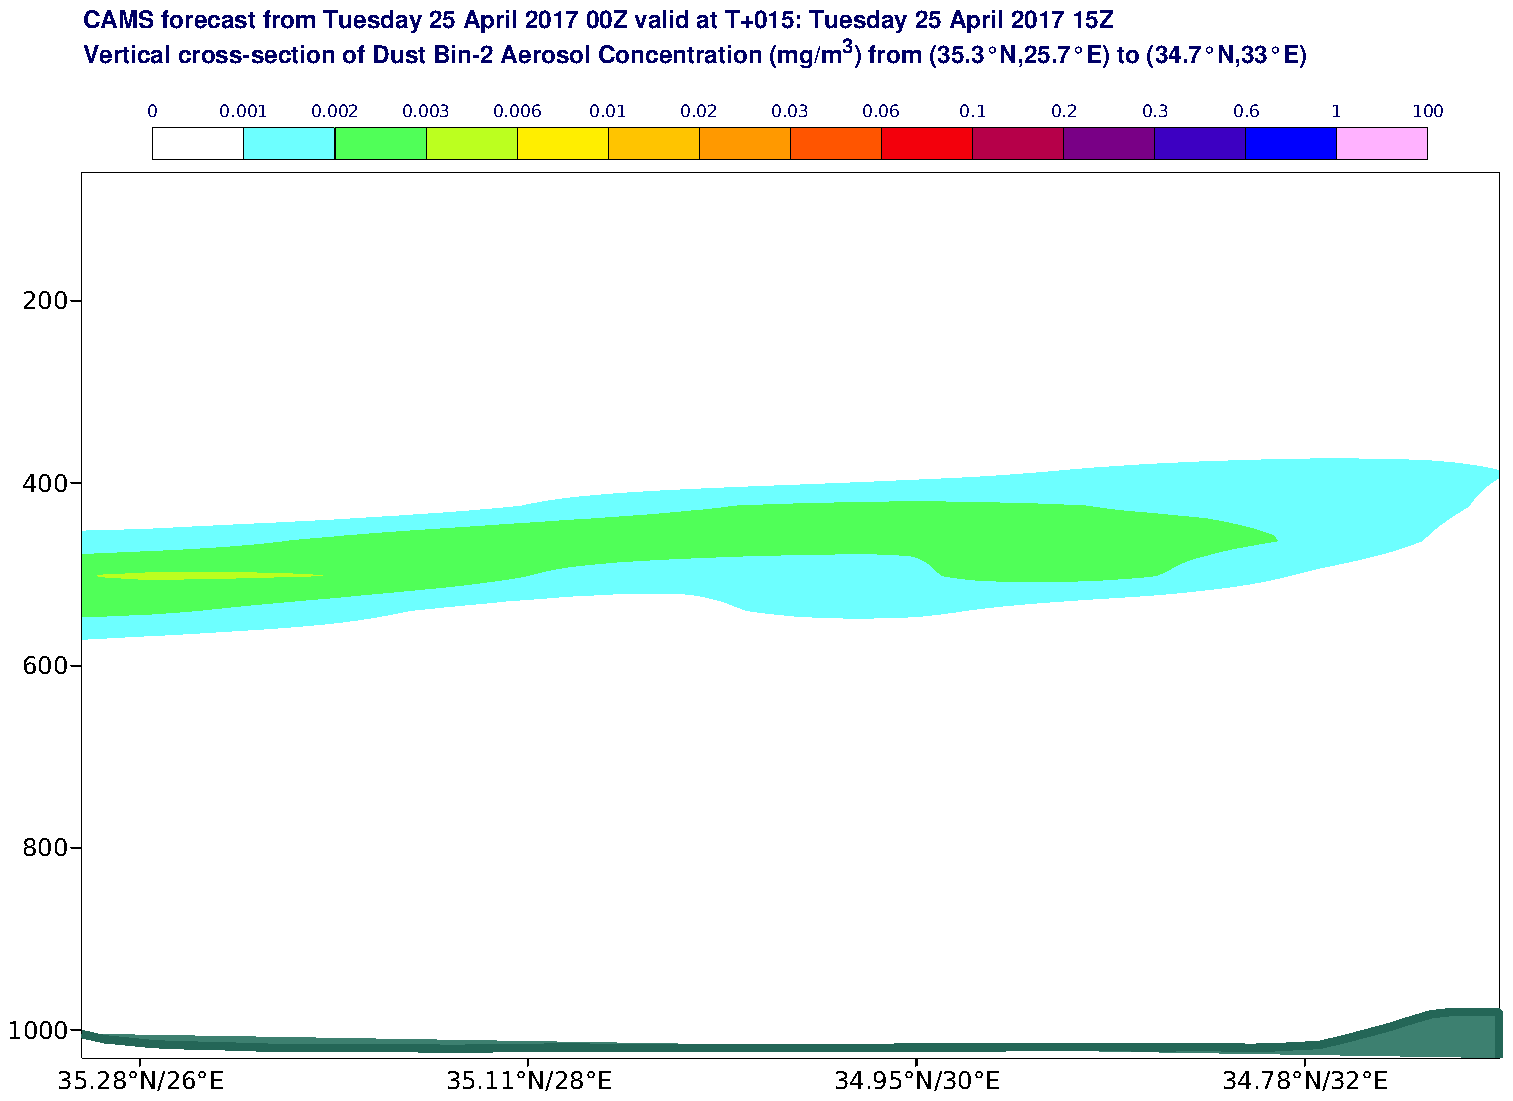 Vertical cross-section of Dust Bin-2 Aerosol Concentration (mg/m3) valid at T15 - 2017-04-25 15:00